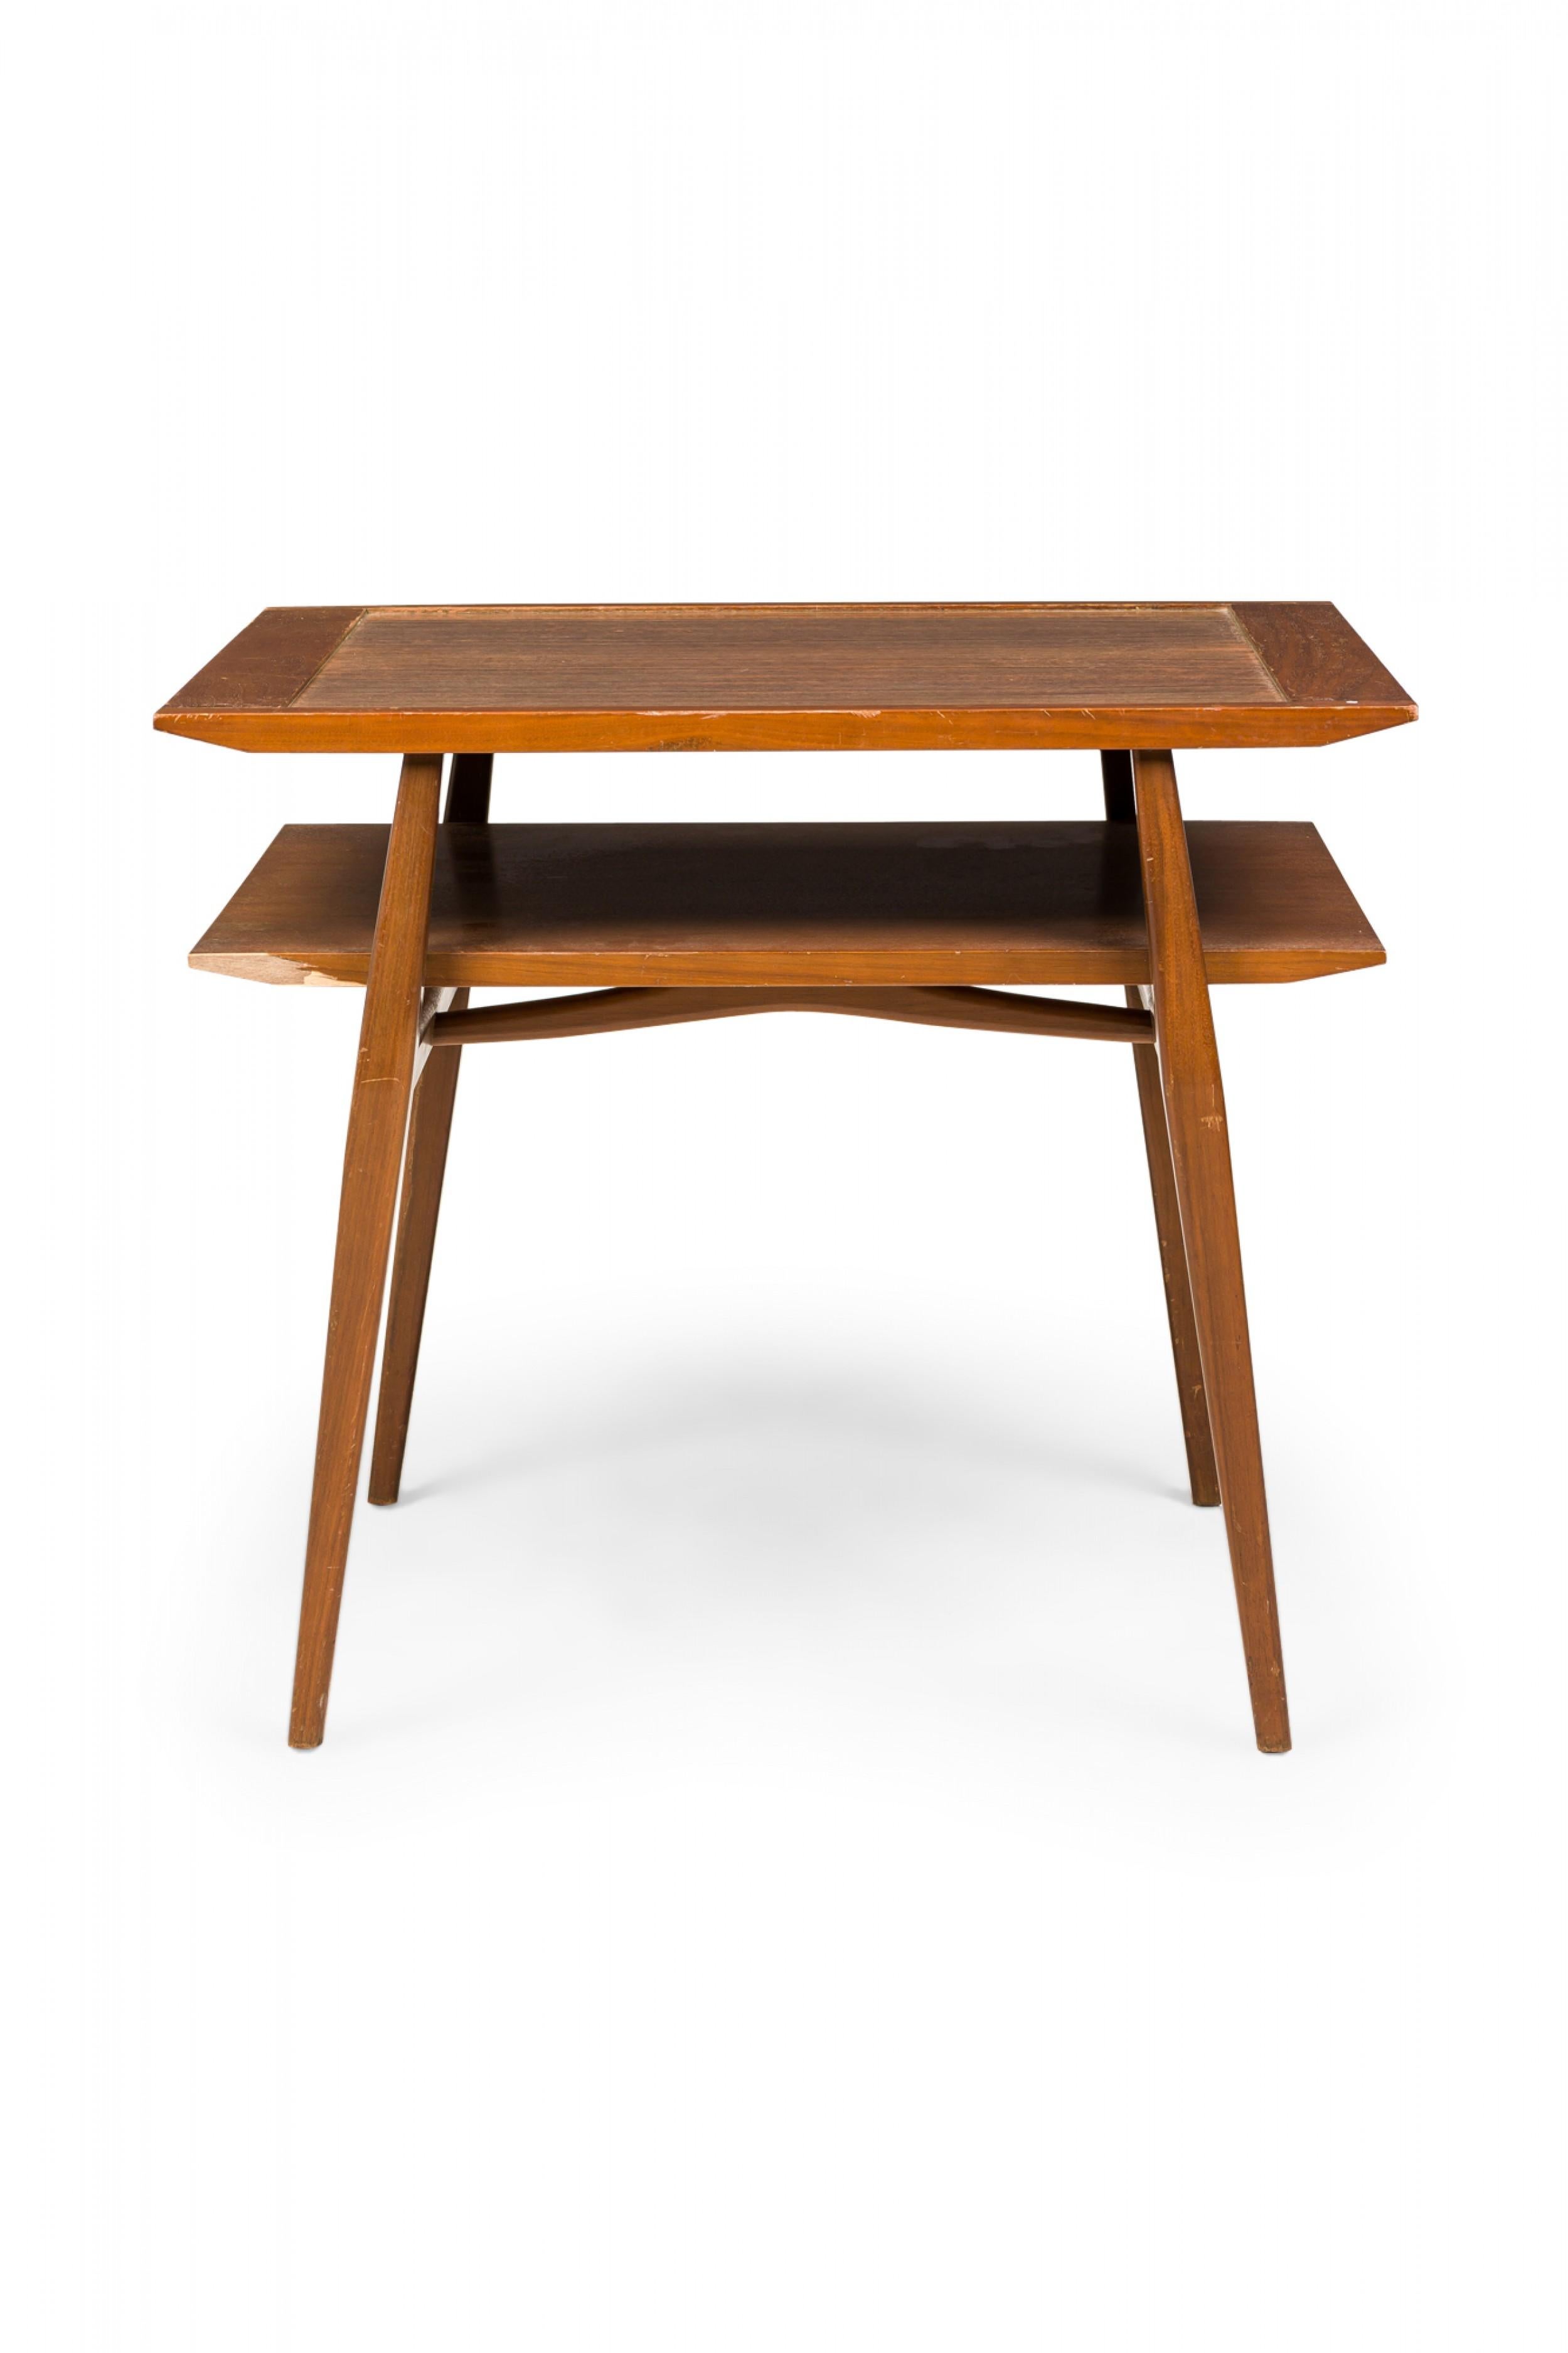 American Bertha Schaefer for Singer & Sons Two-Tier Walnut and Laminate End / Side Table For Sale